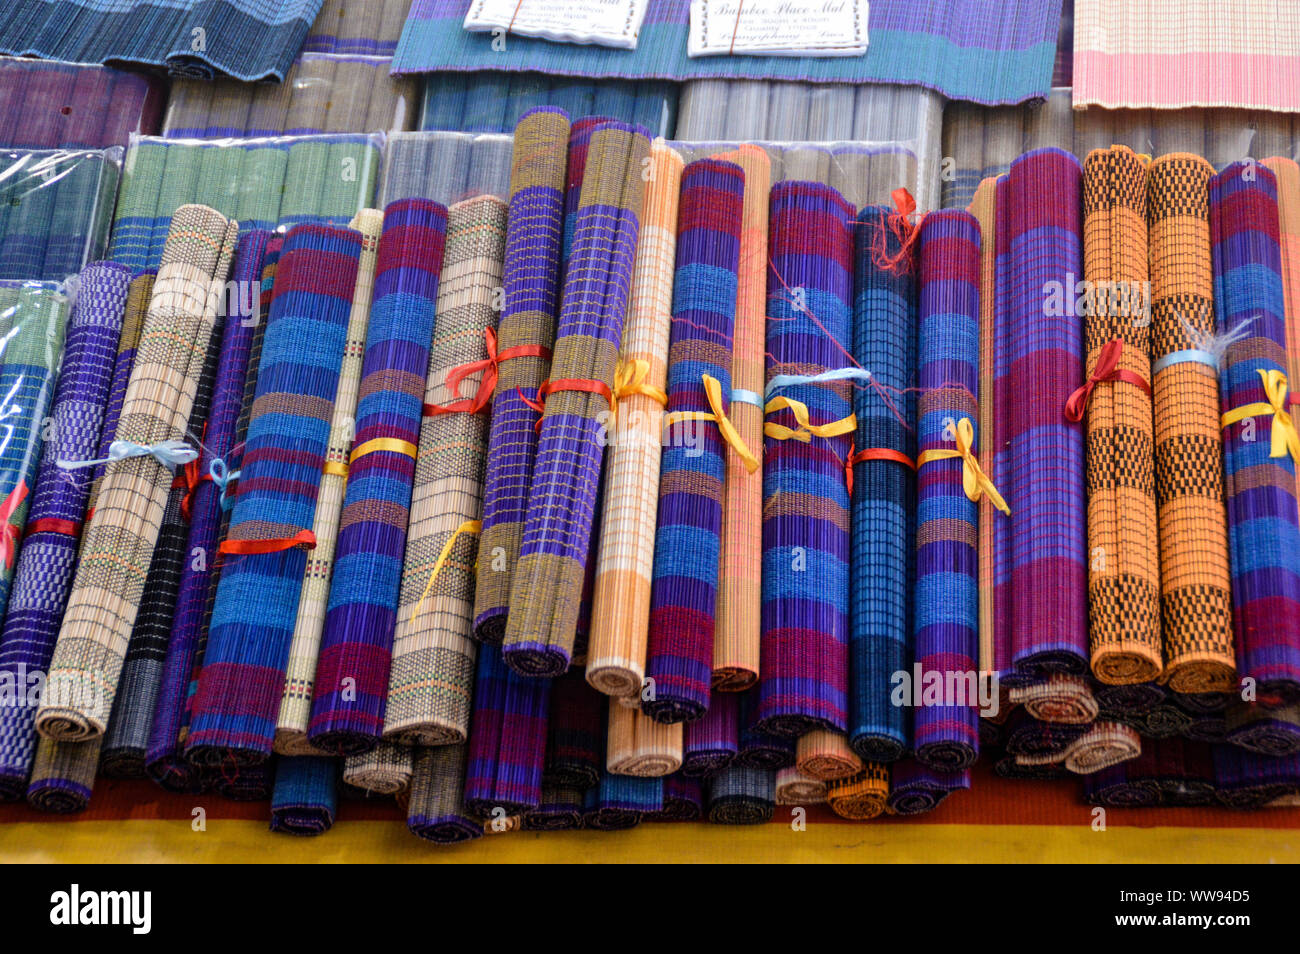 High angle view of hand-crafted bamboo place mats sold as souvenirs in Luang Prabang, Laos Stock Photo